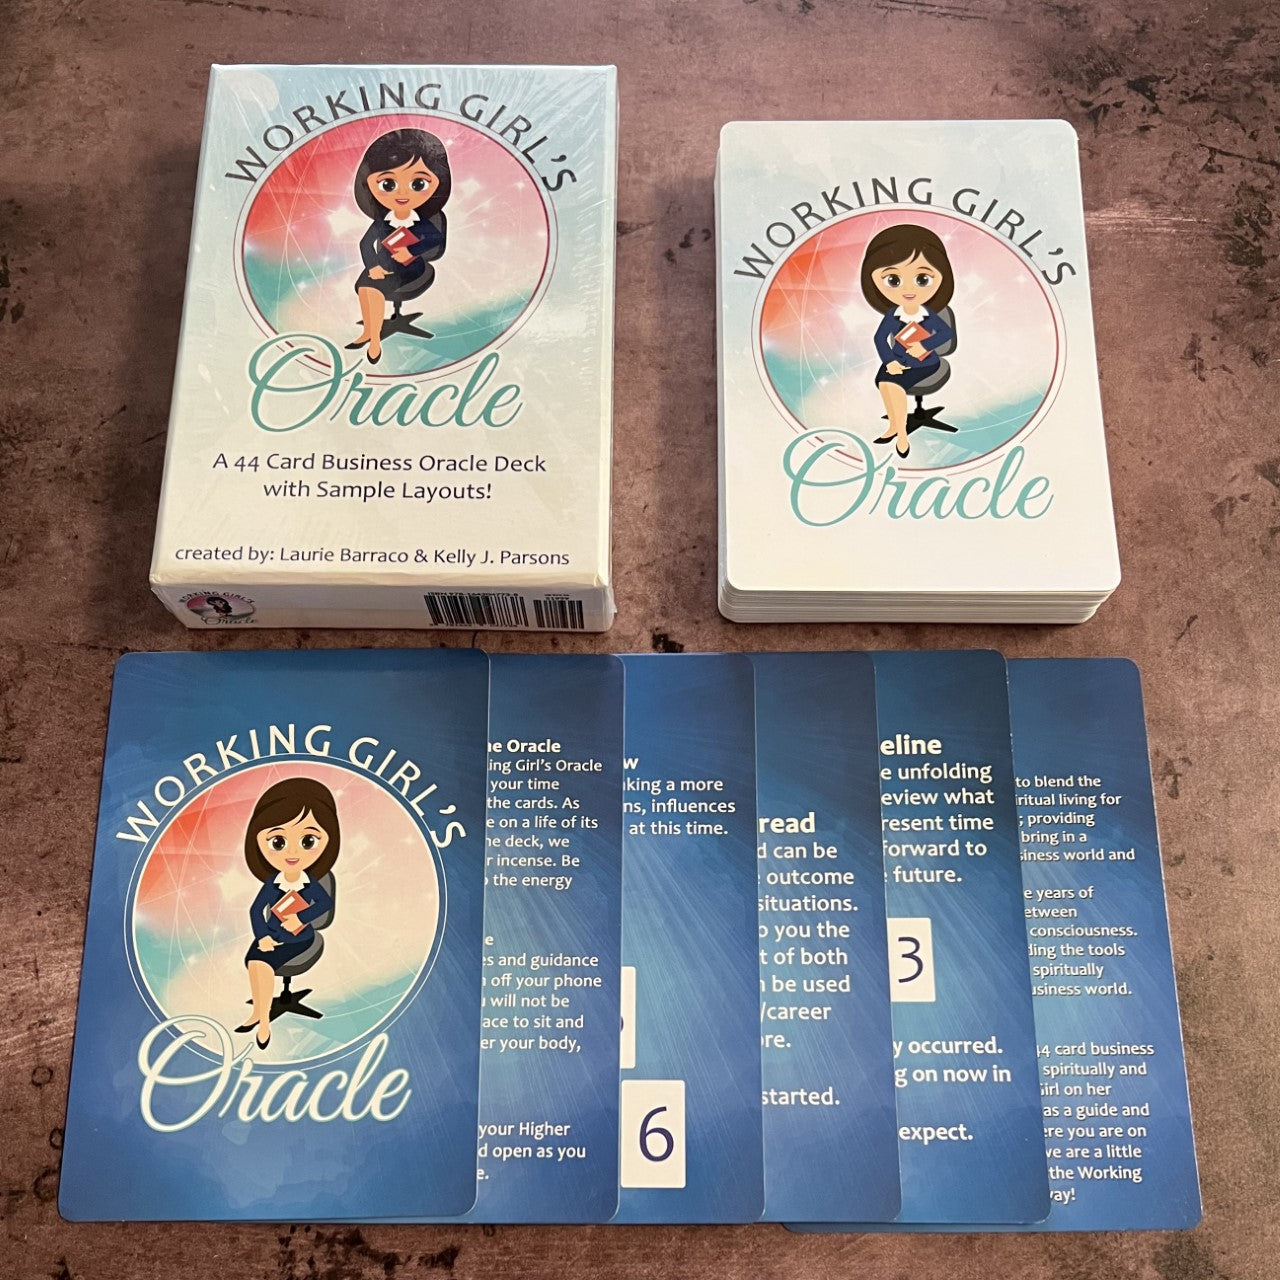 Working Girl's Oracle